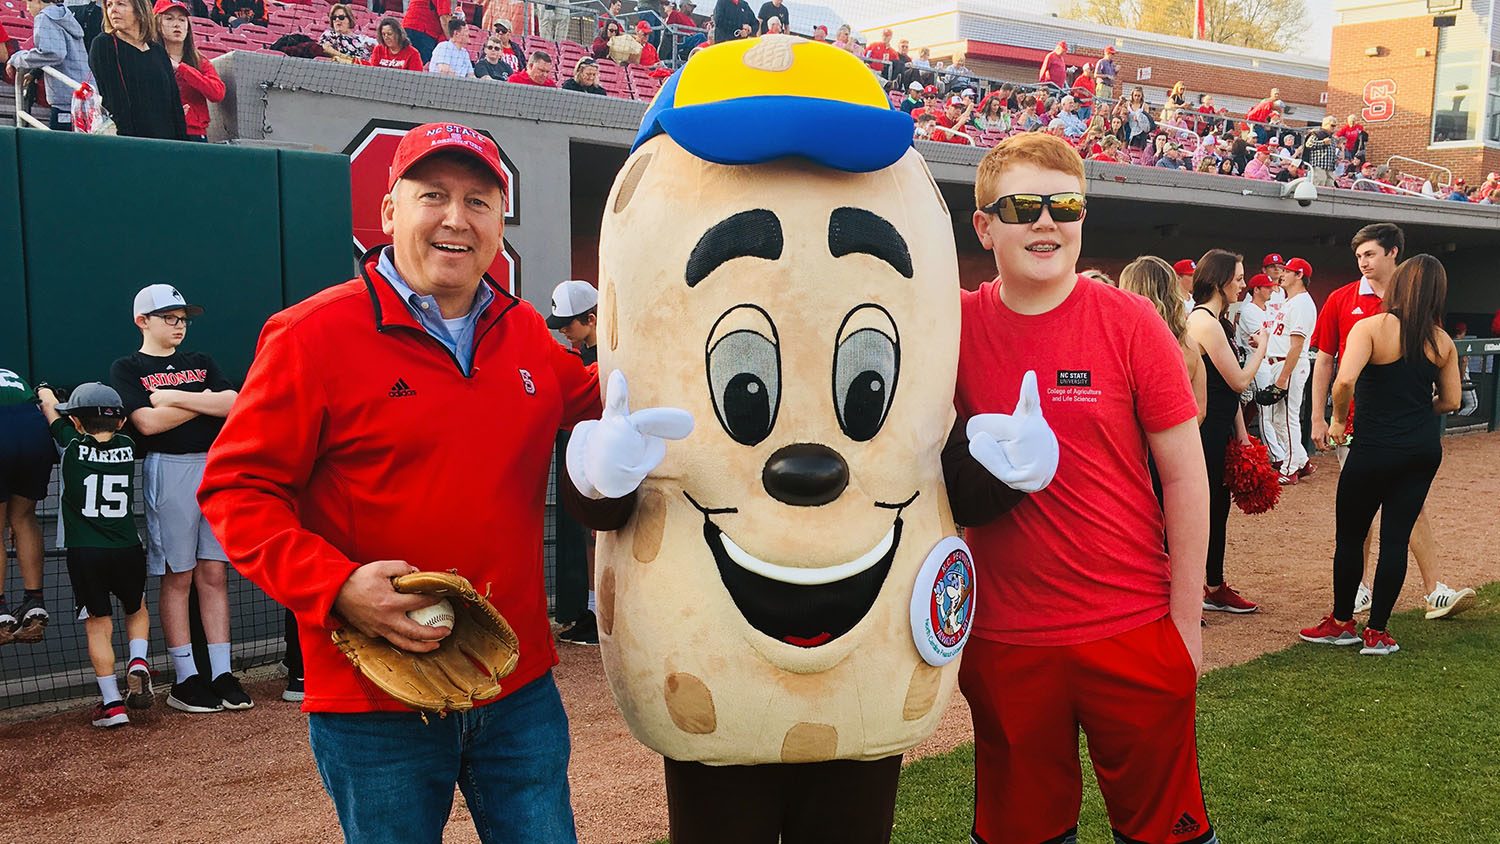 CALS Dean Richard Linton stands with a sports mascot with his son at a baseball game for Father's Day